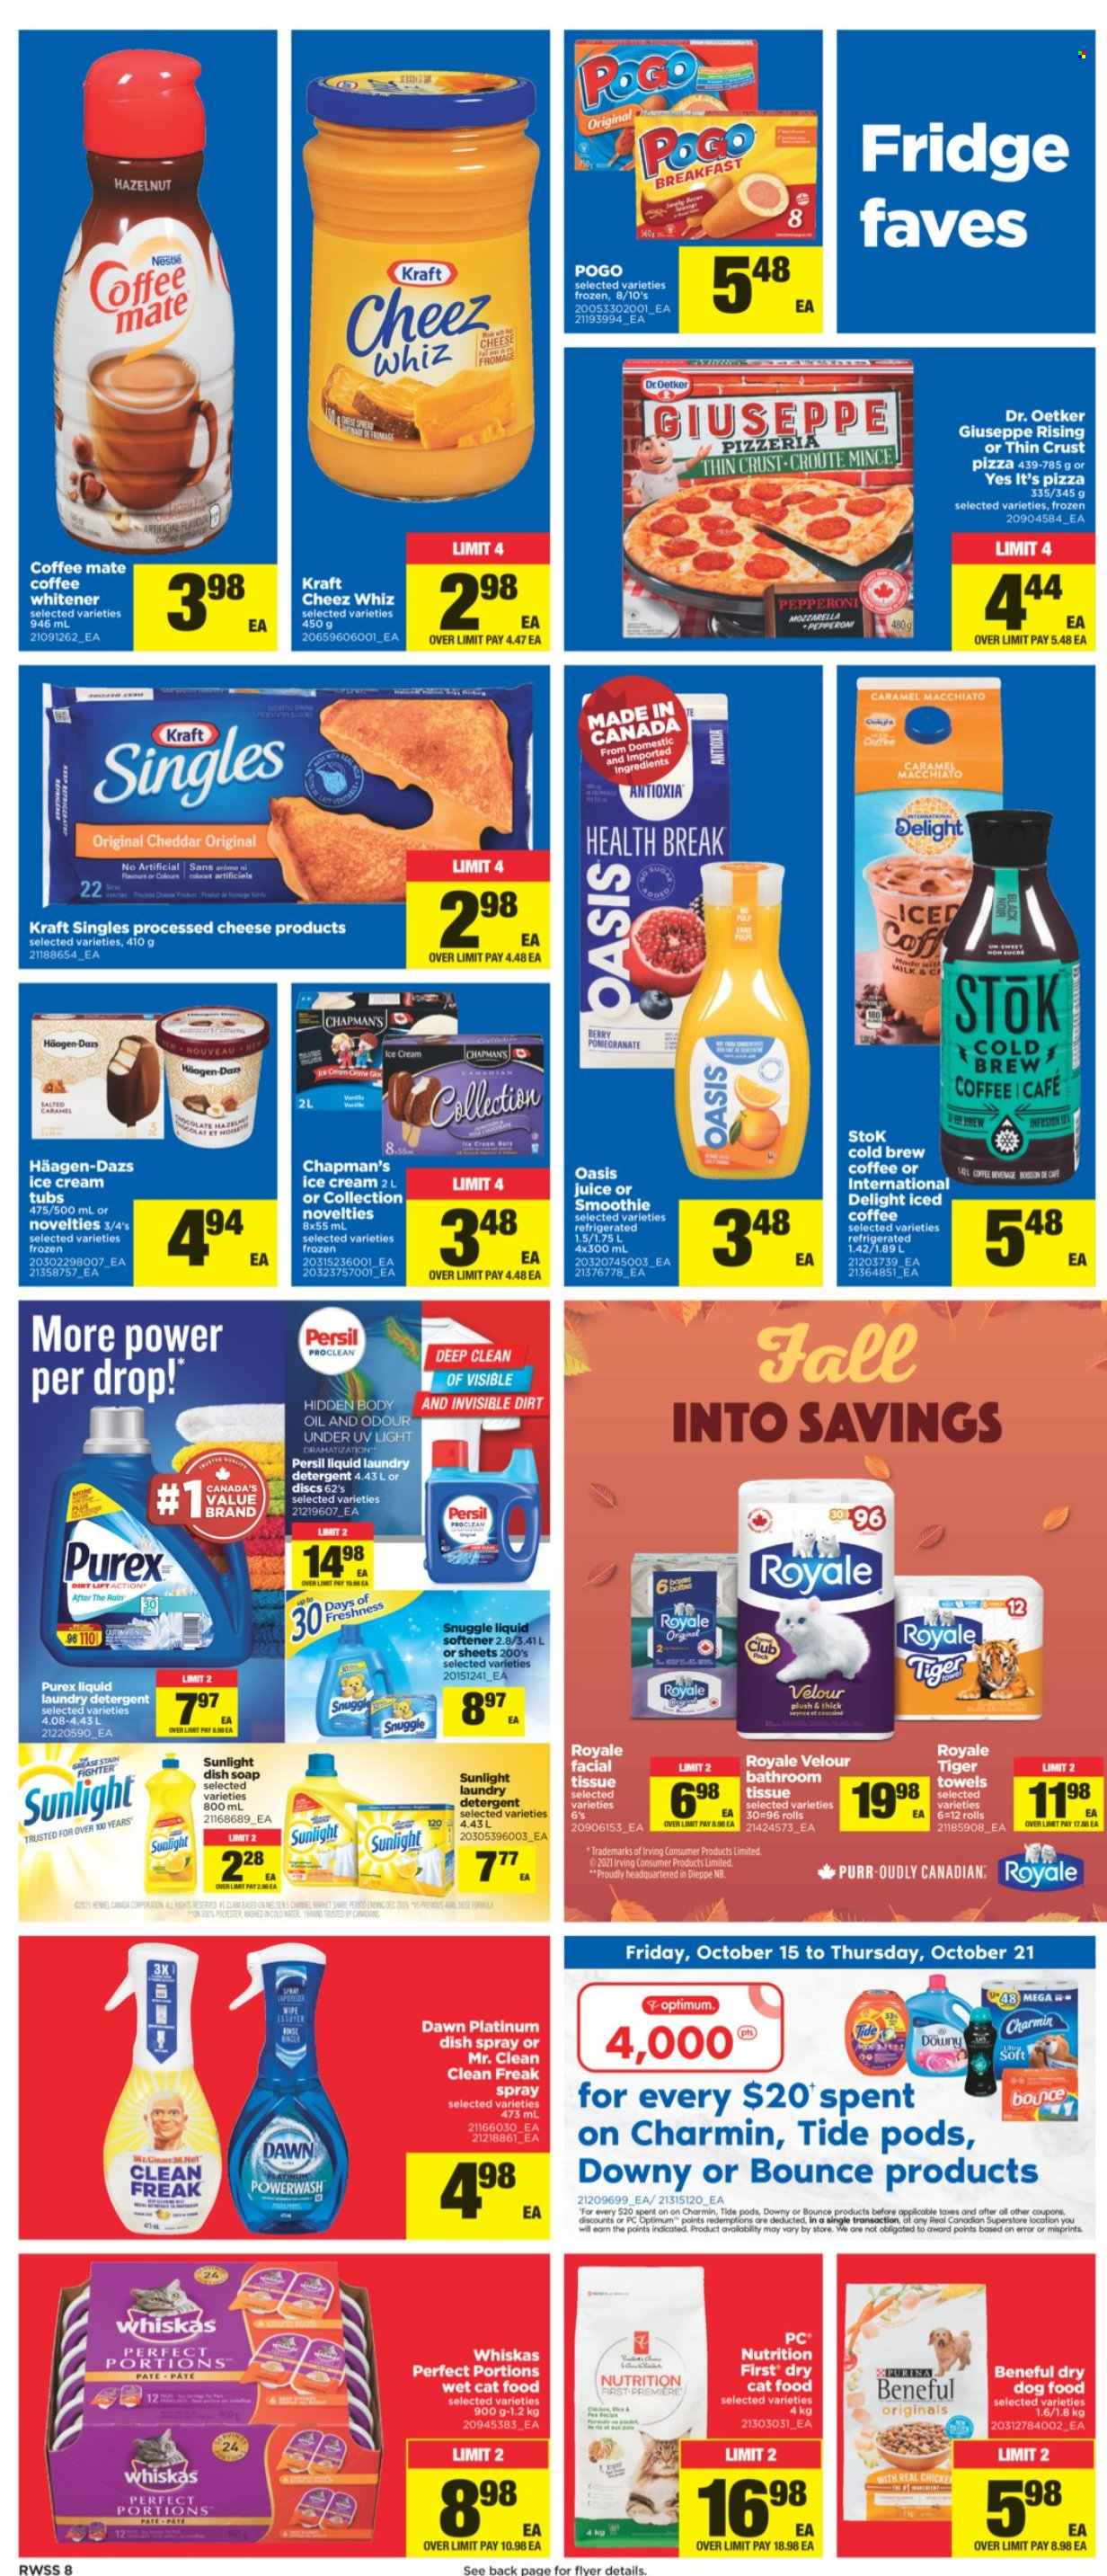 thumbnail - Real Canadian Superstore Flyer - October 15, 2021 - October 21, 2021 - Sales products - pomegranate, pizza, Kraft®, pepperoni, sandwich slices, cheddar, Dr. Oetker, Kraft Singles, Coffee-Mate, Häagen-Dazs, caramel, juice, smoothie, iced coffee, tissues, Charmin, Snuggle, Tide, Persil, fabric softener, laundry detergent, Sunlight, Bounce, Purex, soap, body oil, towel, PREMIERE, animal food, cat food, dog food, Optimum, dry cat food, wet cat food, Nestlé, detergent, Whiskas. Page 8.